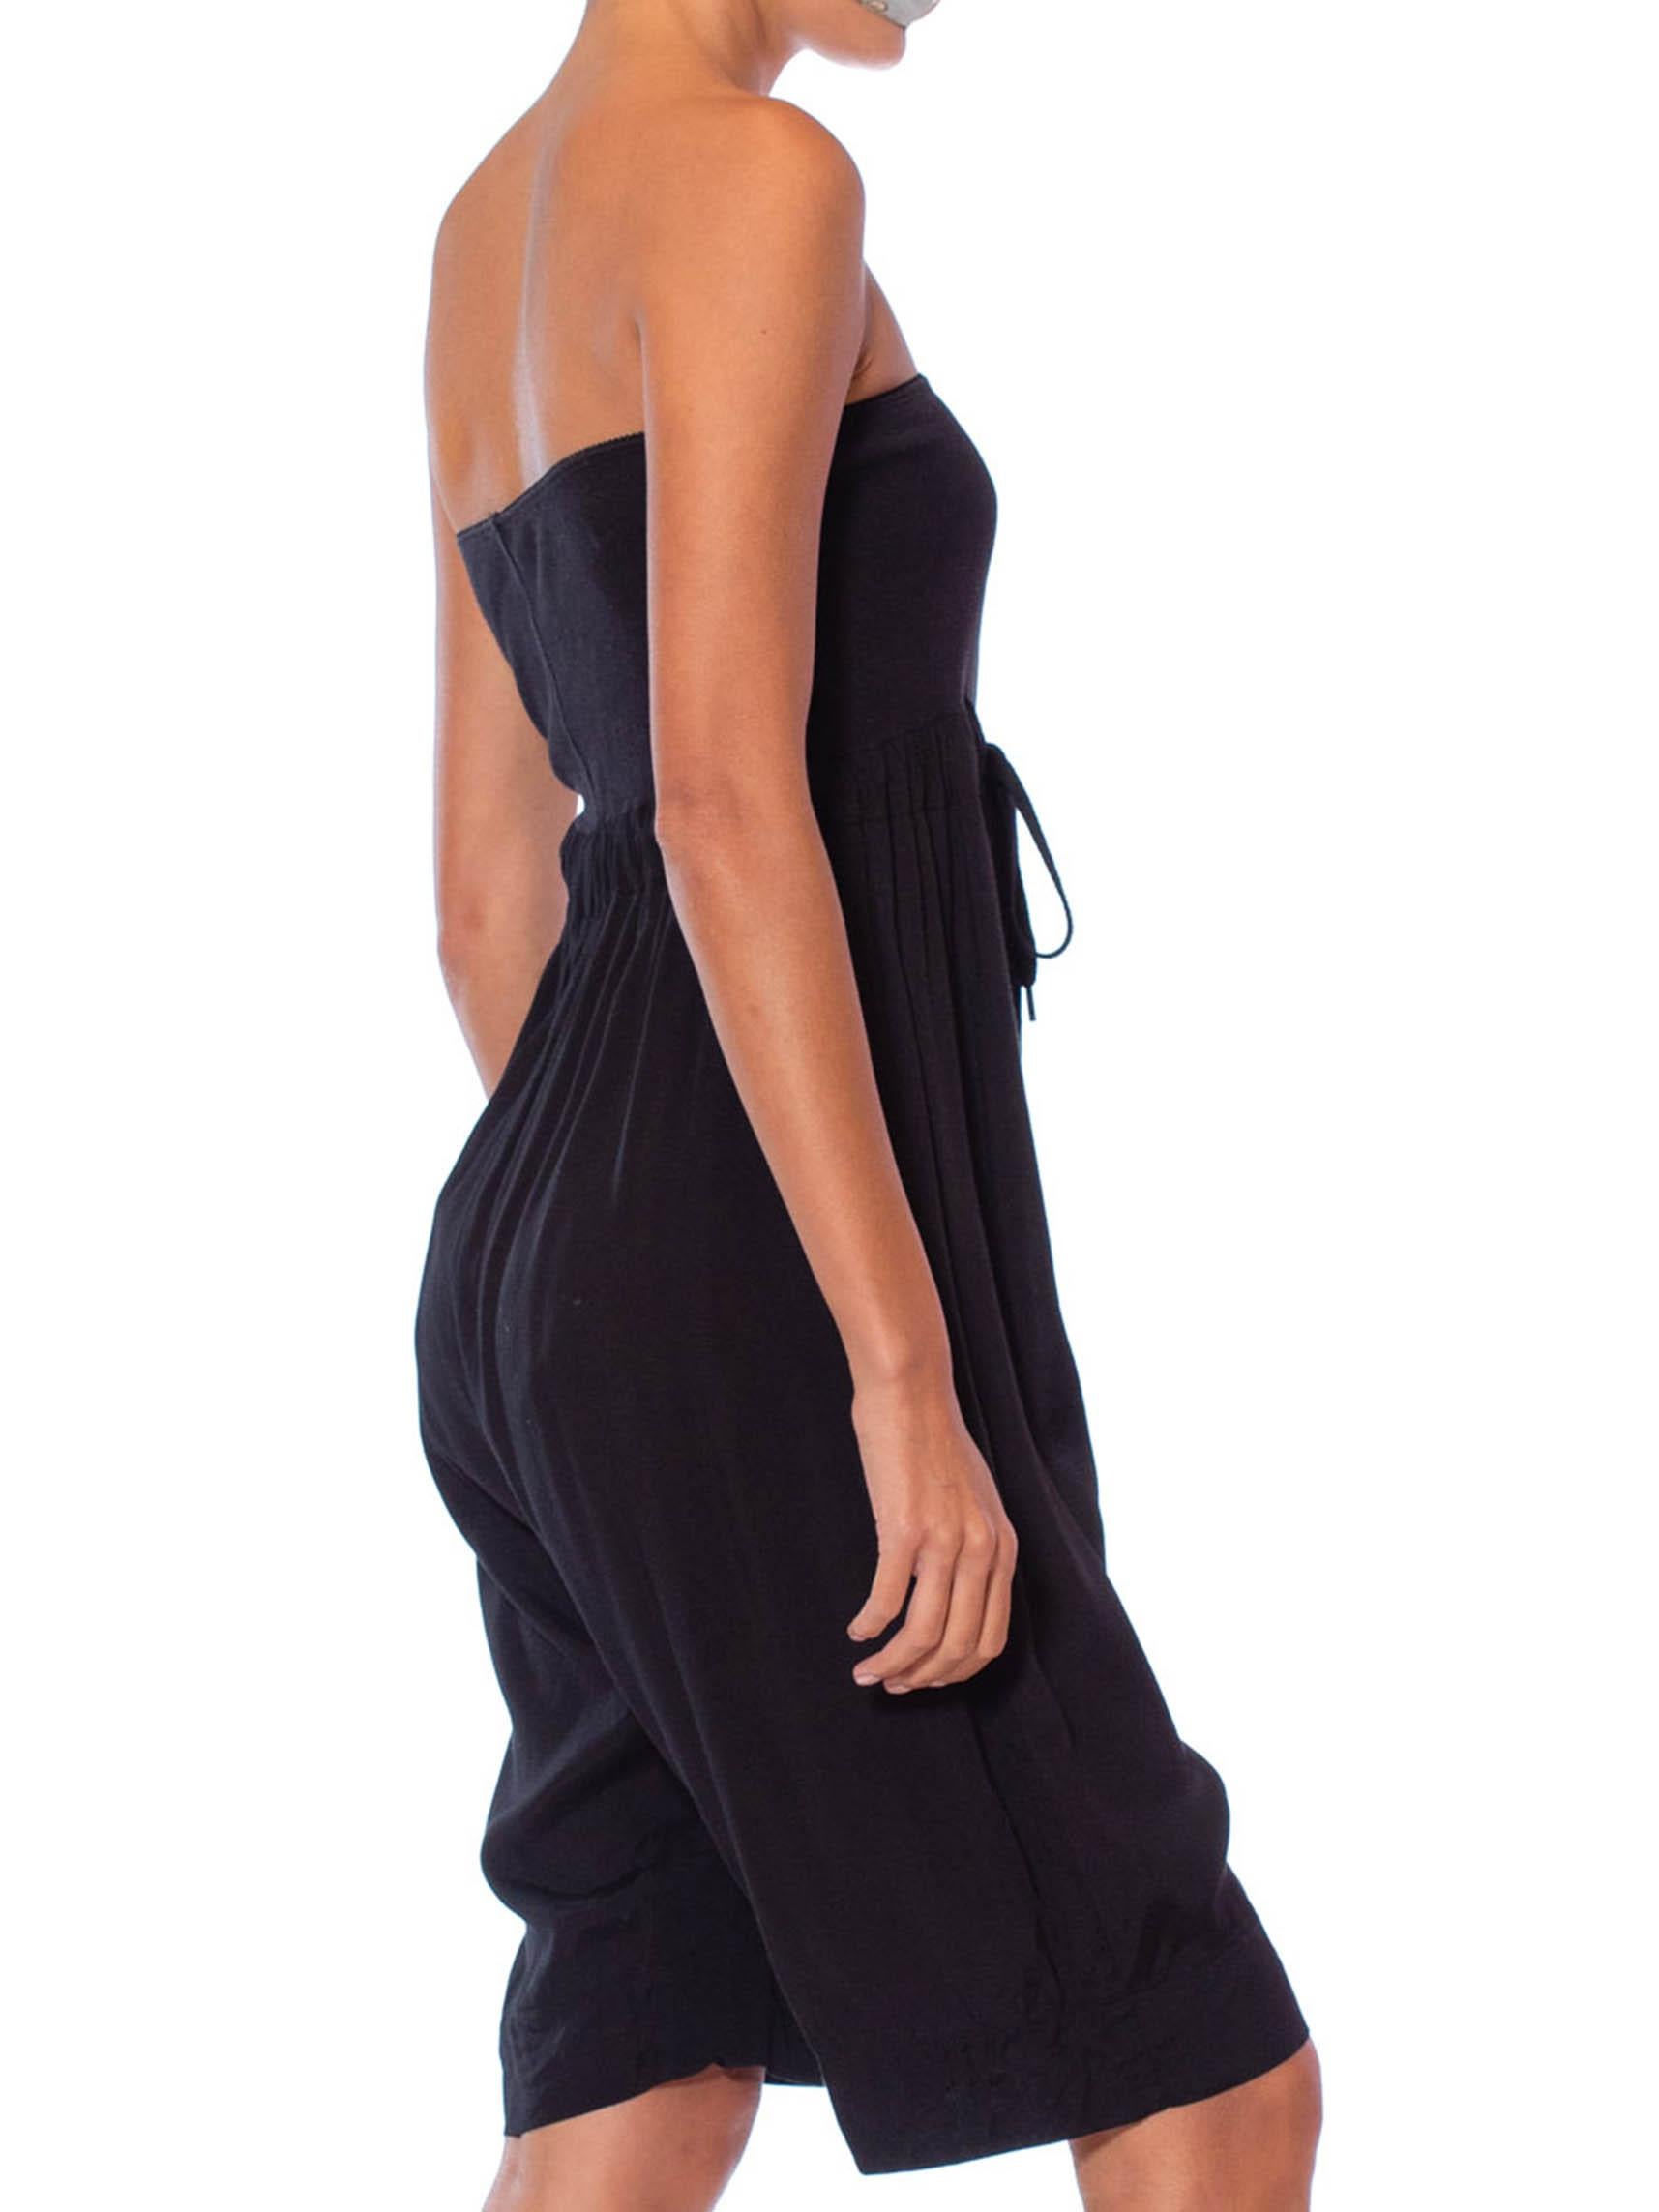 2000S Black Strapless Viscose & Cotton Romper In Excellent Condition For Sale In New York, NY